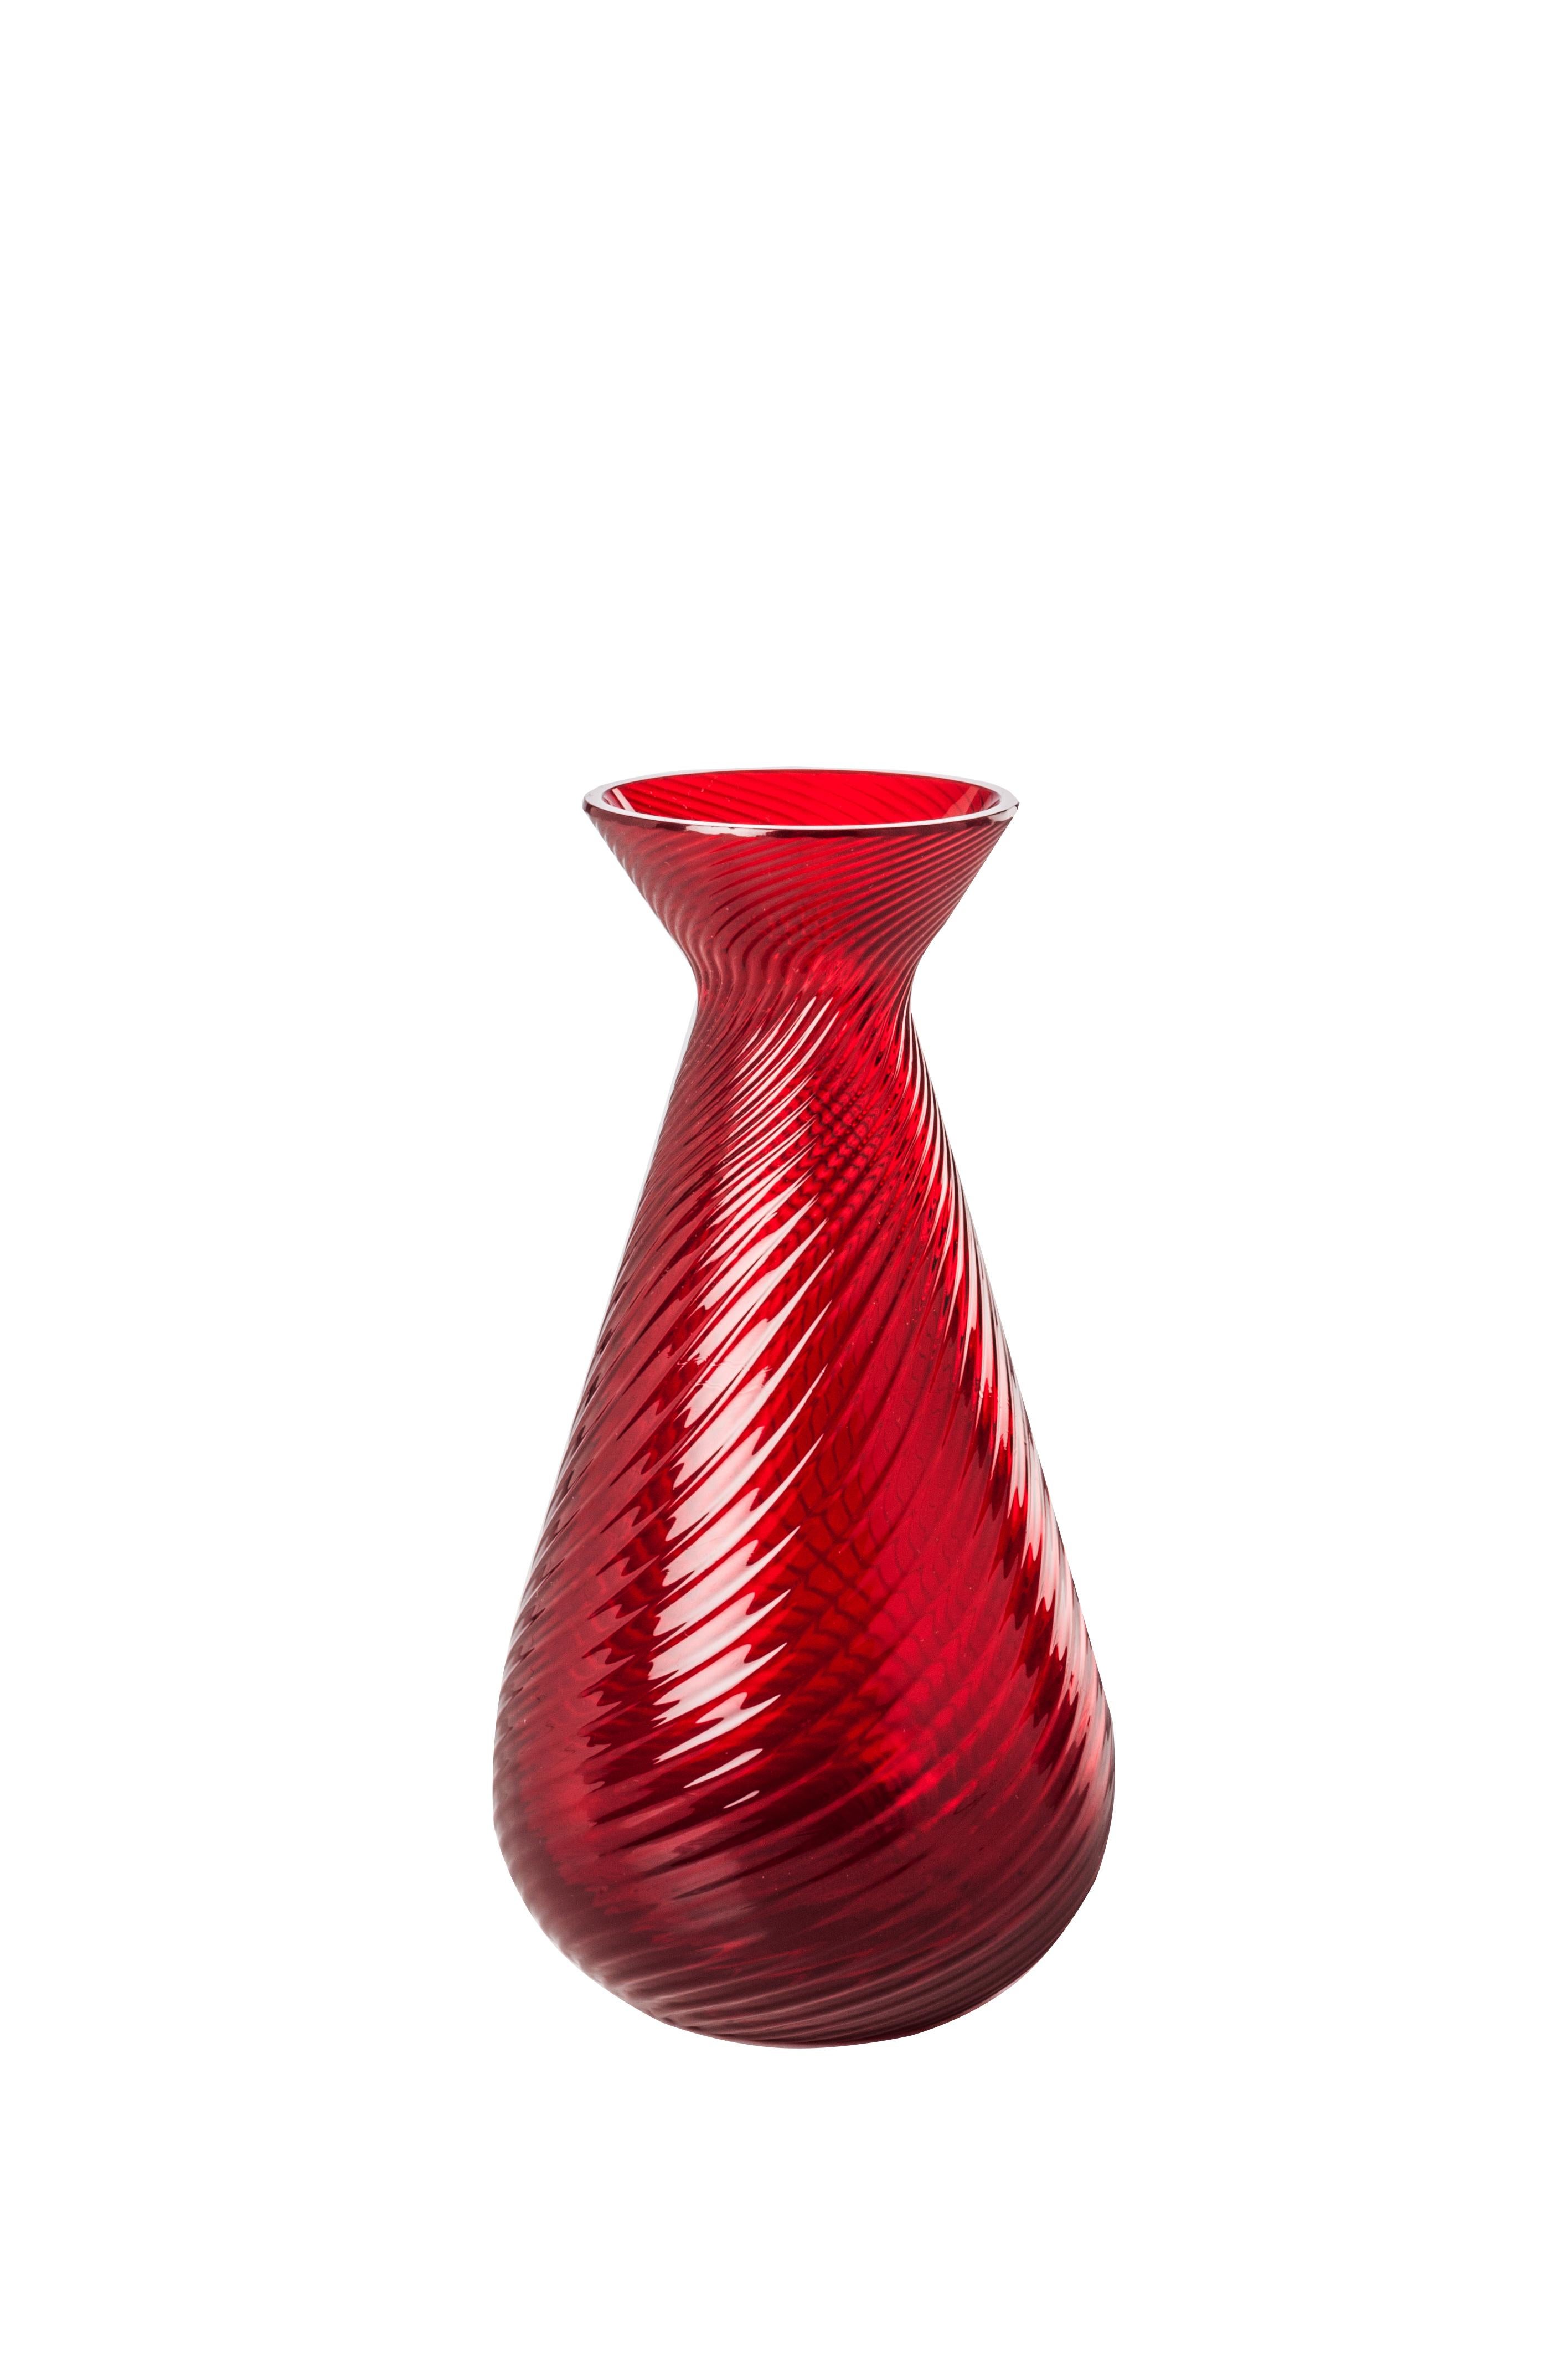 Venini glass vase with shaped body and neck in red designed in 2017. Perfect for indoor home decor as container or statement piece for any room. Also available in other colors on 1stdibs.

Dimensions: 8 cm diameter x 15.5 cm height.